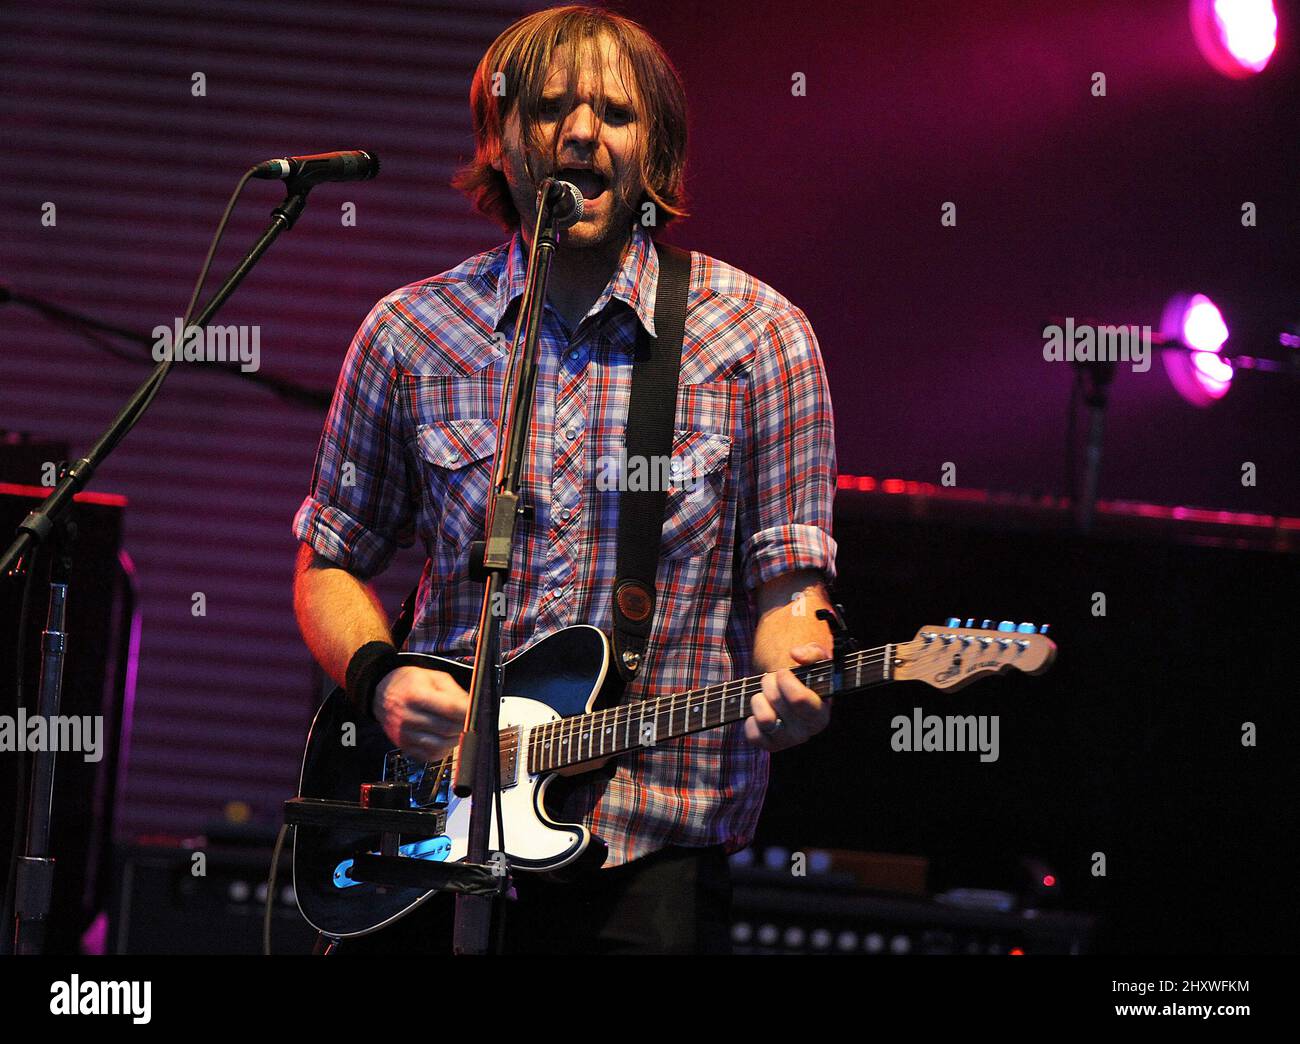 Benjamin Gibbard of Death Cab for Cutie performs on stage at the Koka Booth Amphitheater in Cary, NC Stock Photo